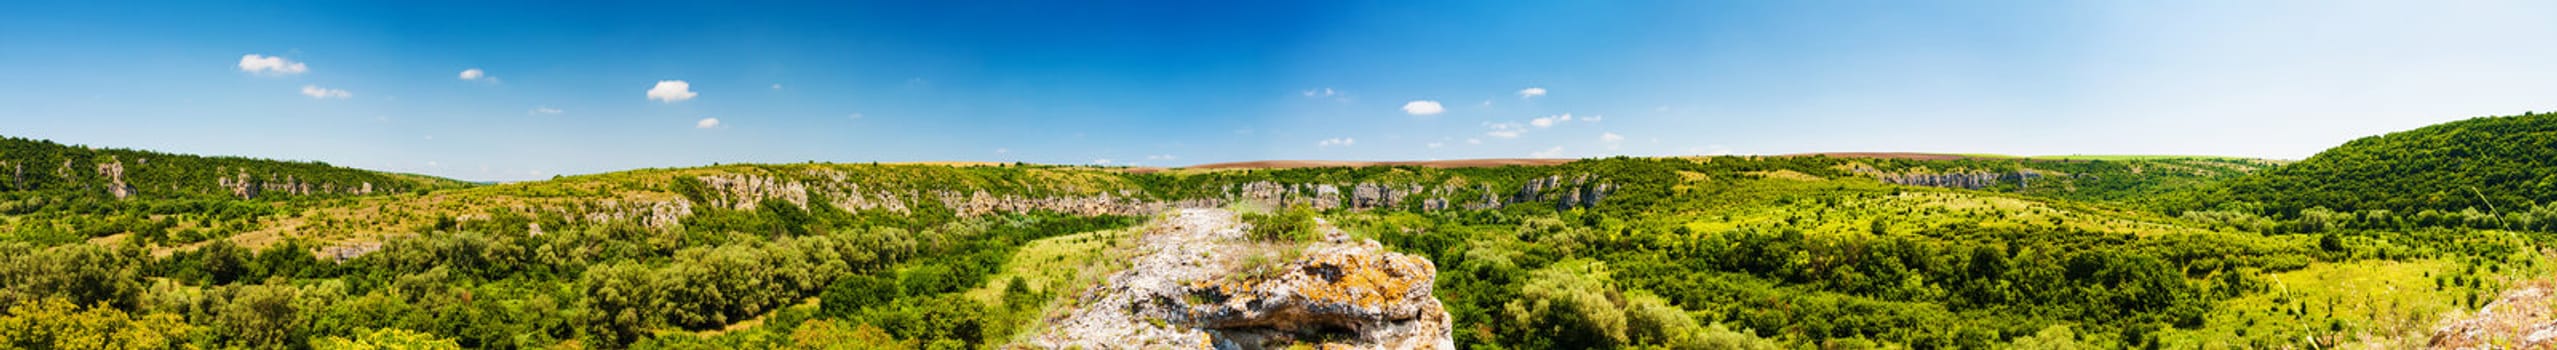 Panorama of the canyon of Rusenski Lom, Bulgaria. The wholes in the rocks are dwellings used as Hesychasm monastery